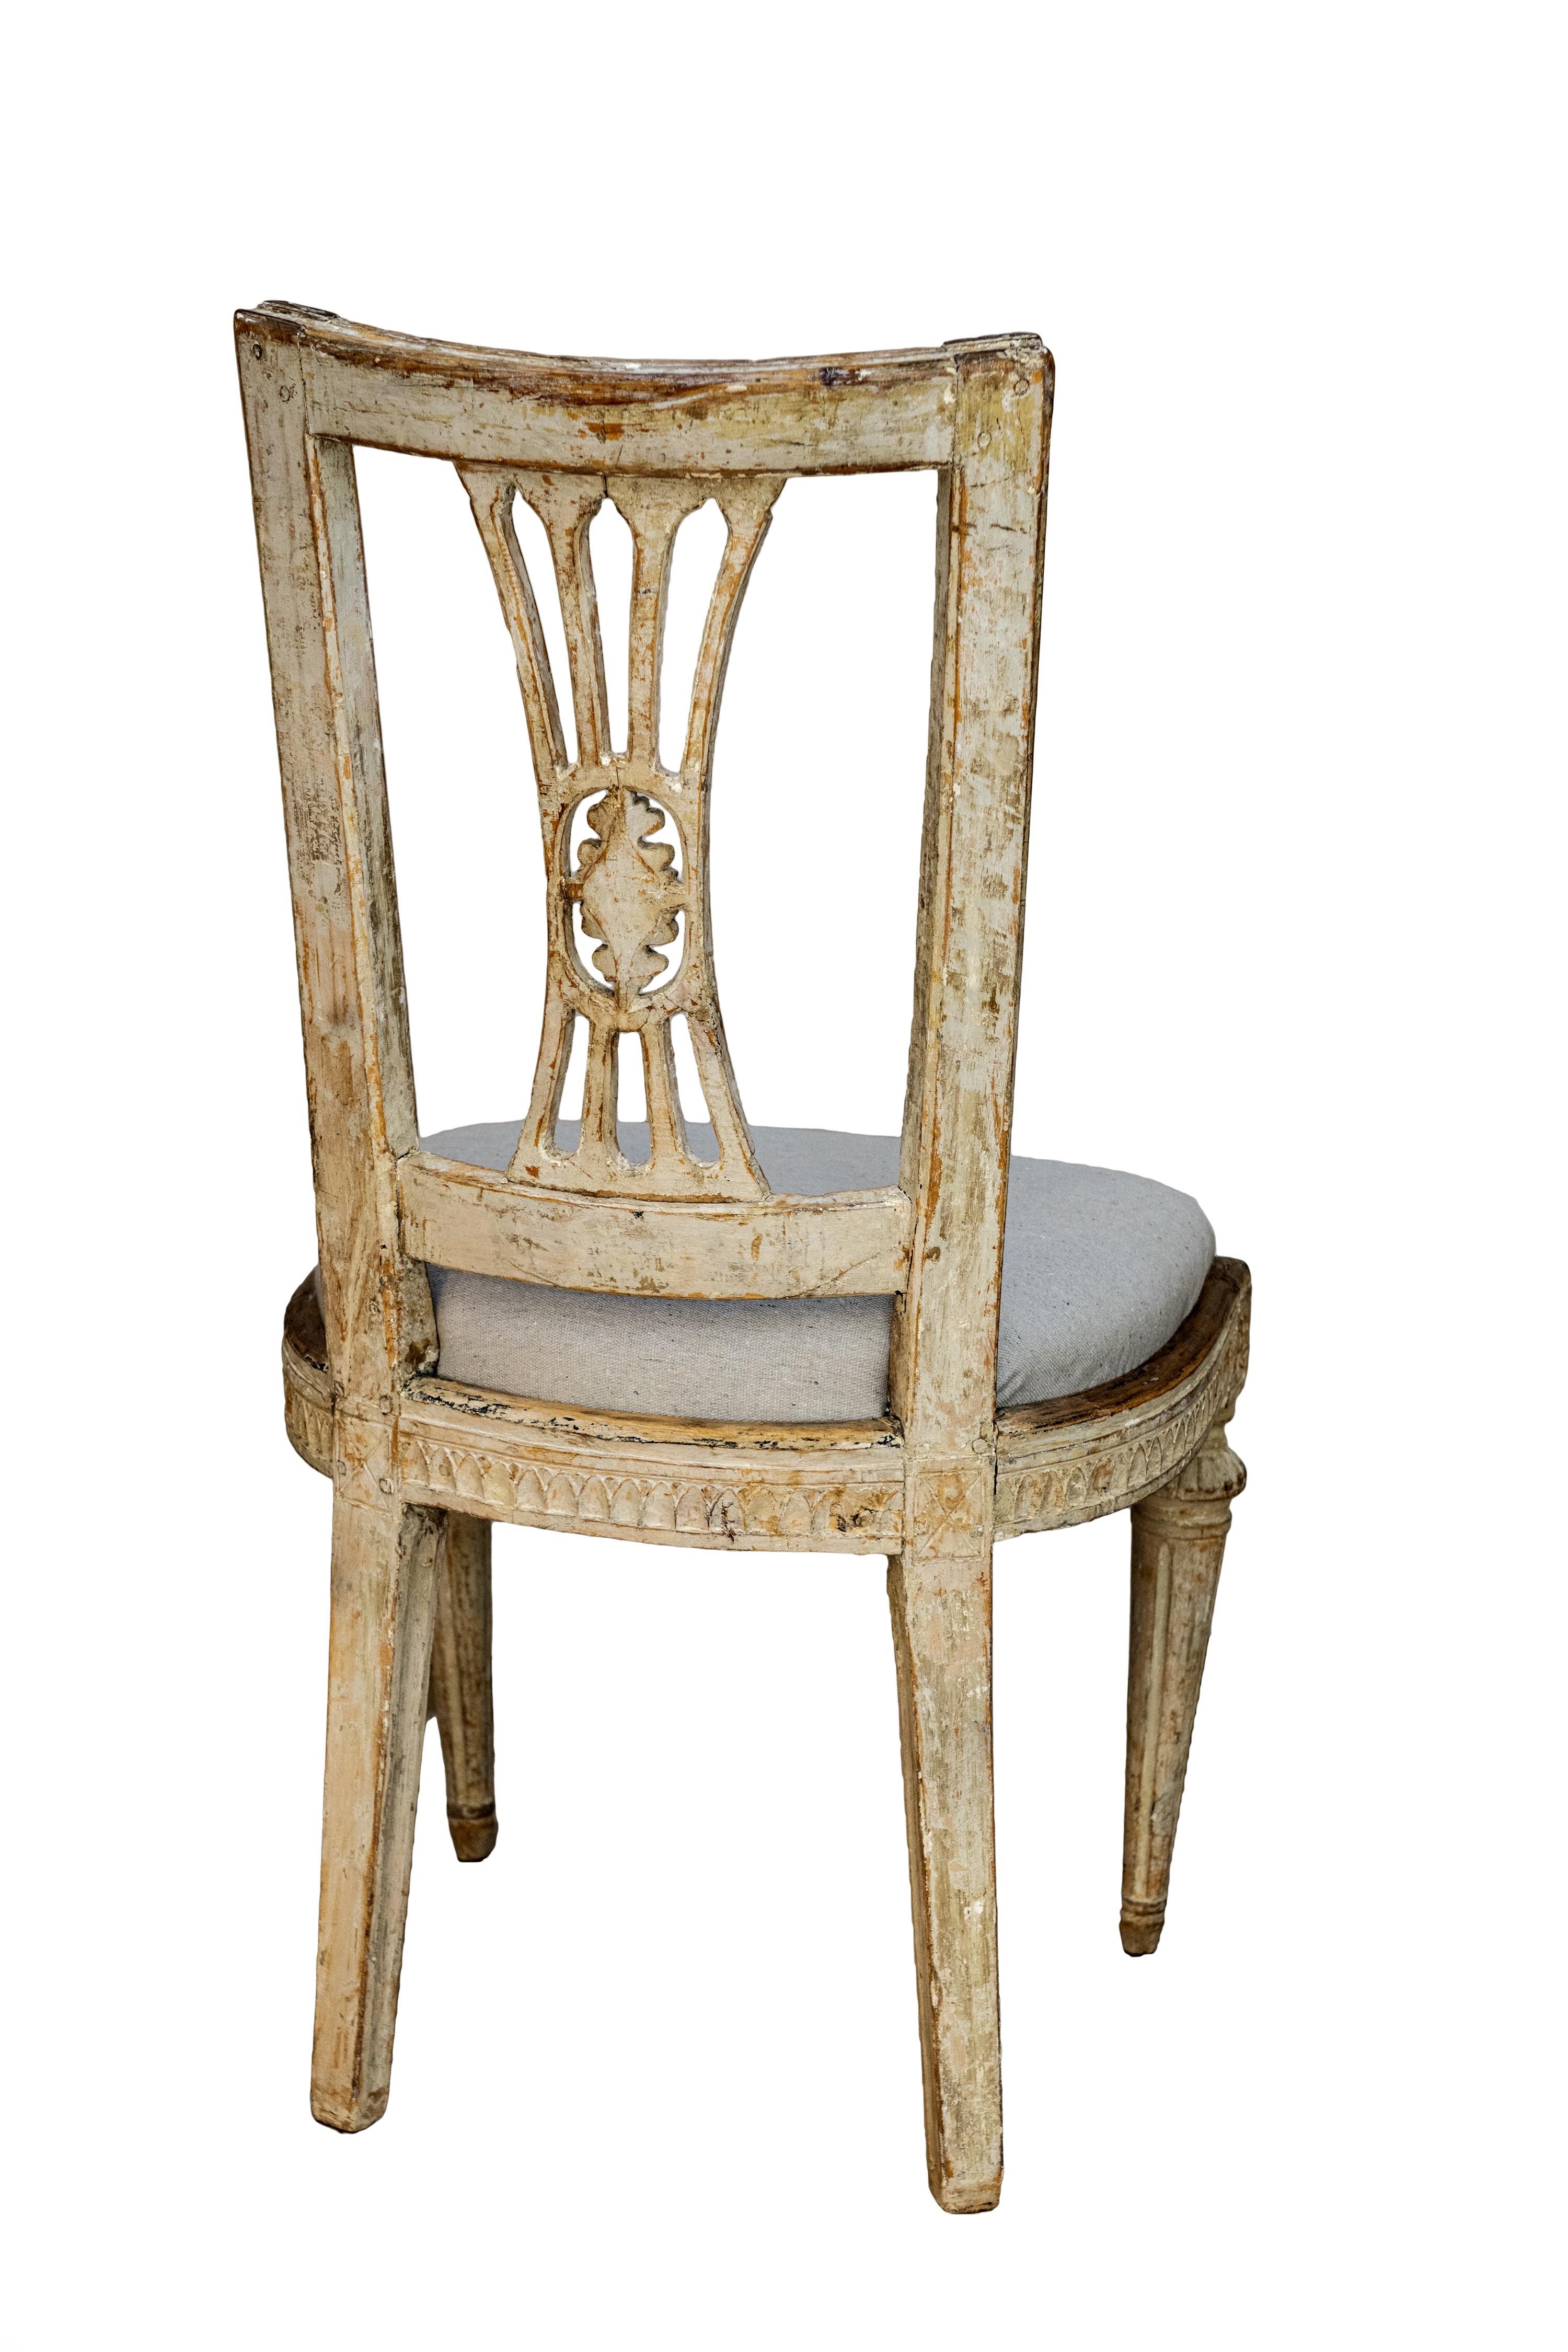 Matched Set of Six Painted Gustavian Dining Chairs, 2 Armchairs and 4 Chairs 3